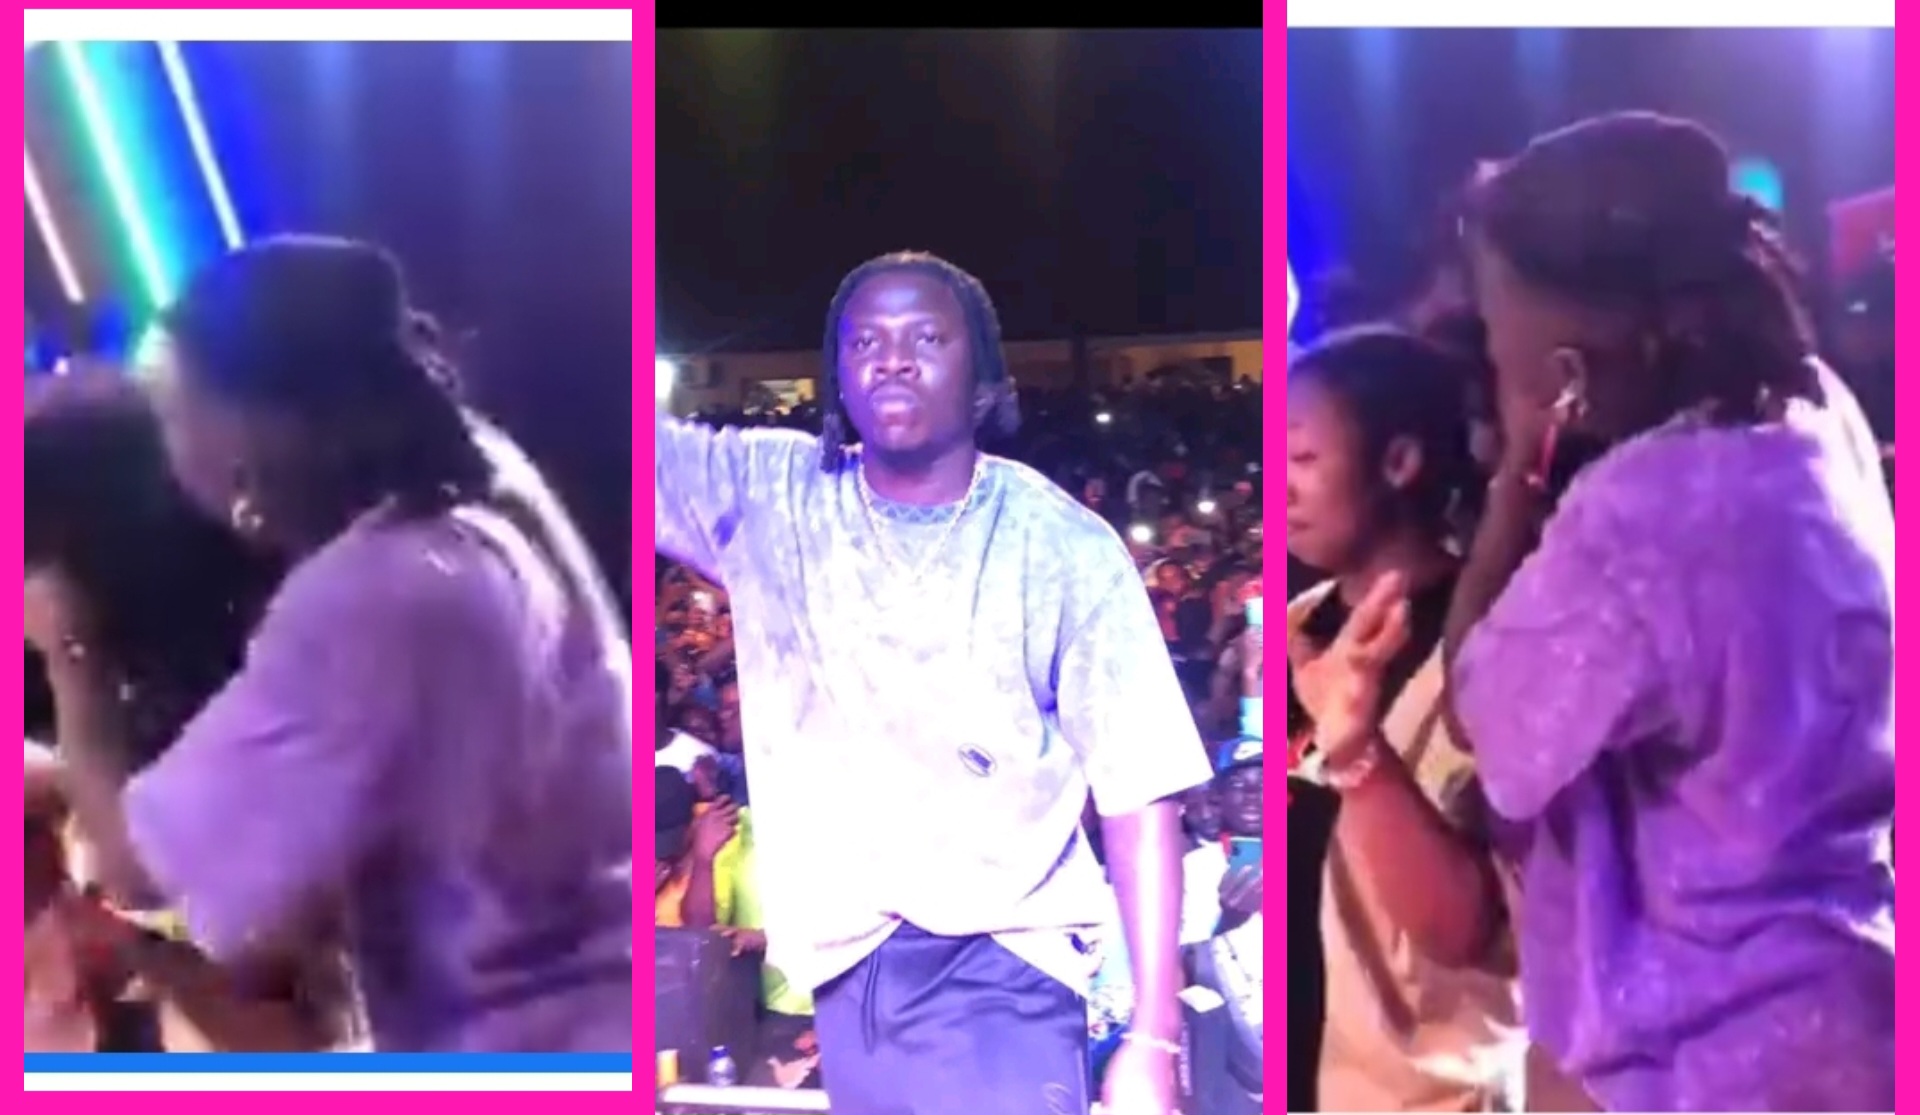 Lovely moment as Stonebwoy fixes a fan’s wig on stage during his performance at Berekum [WATCH VIDEO]